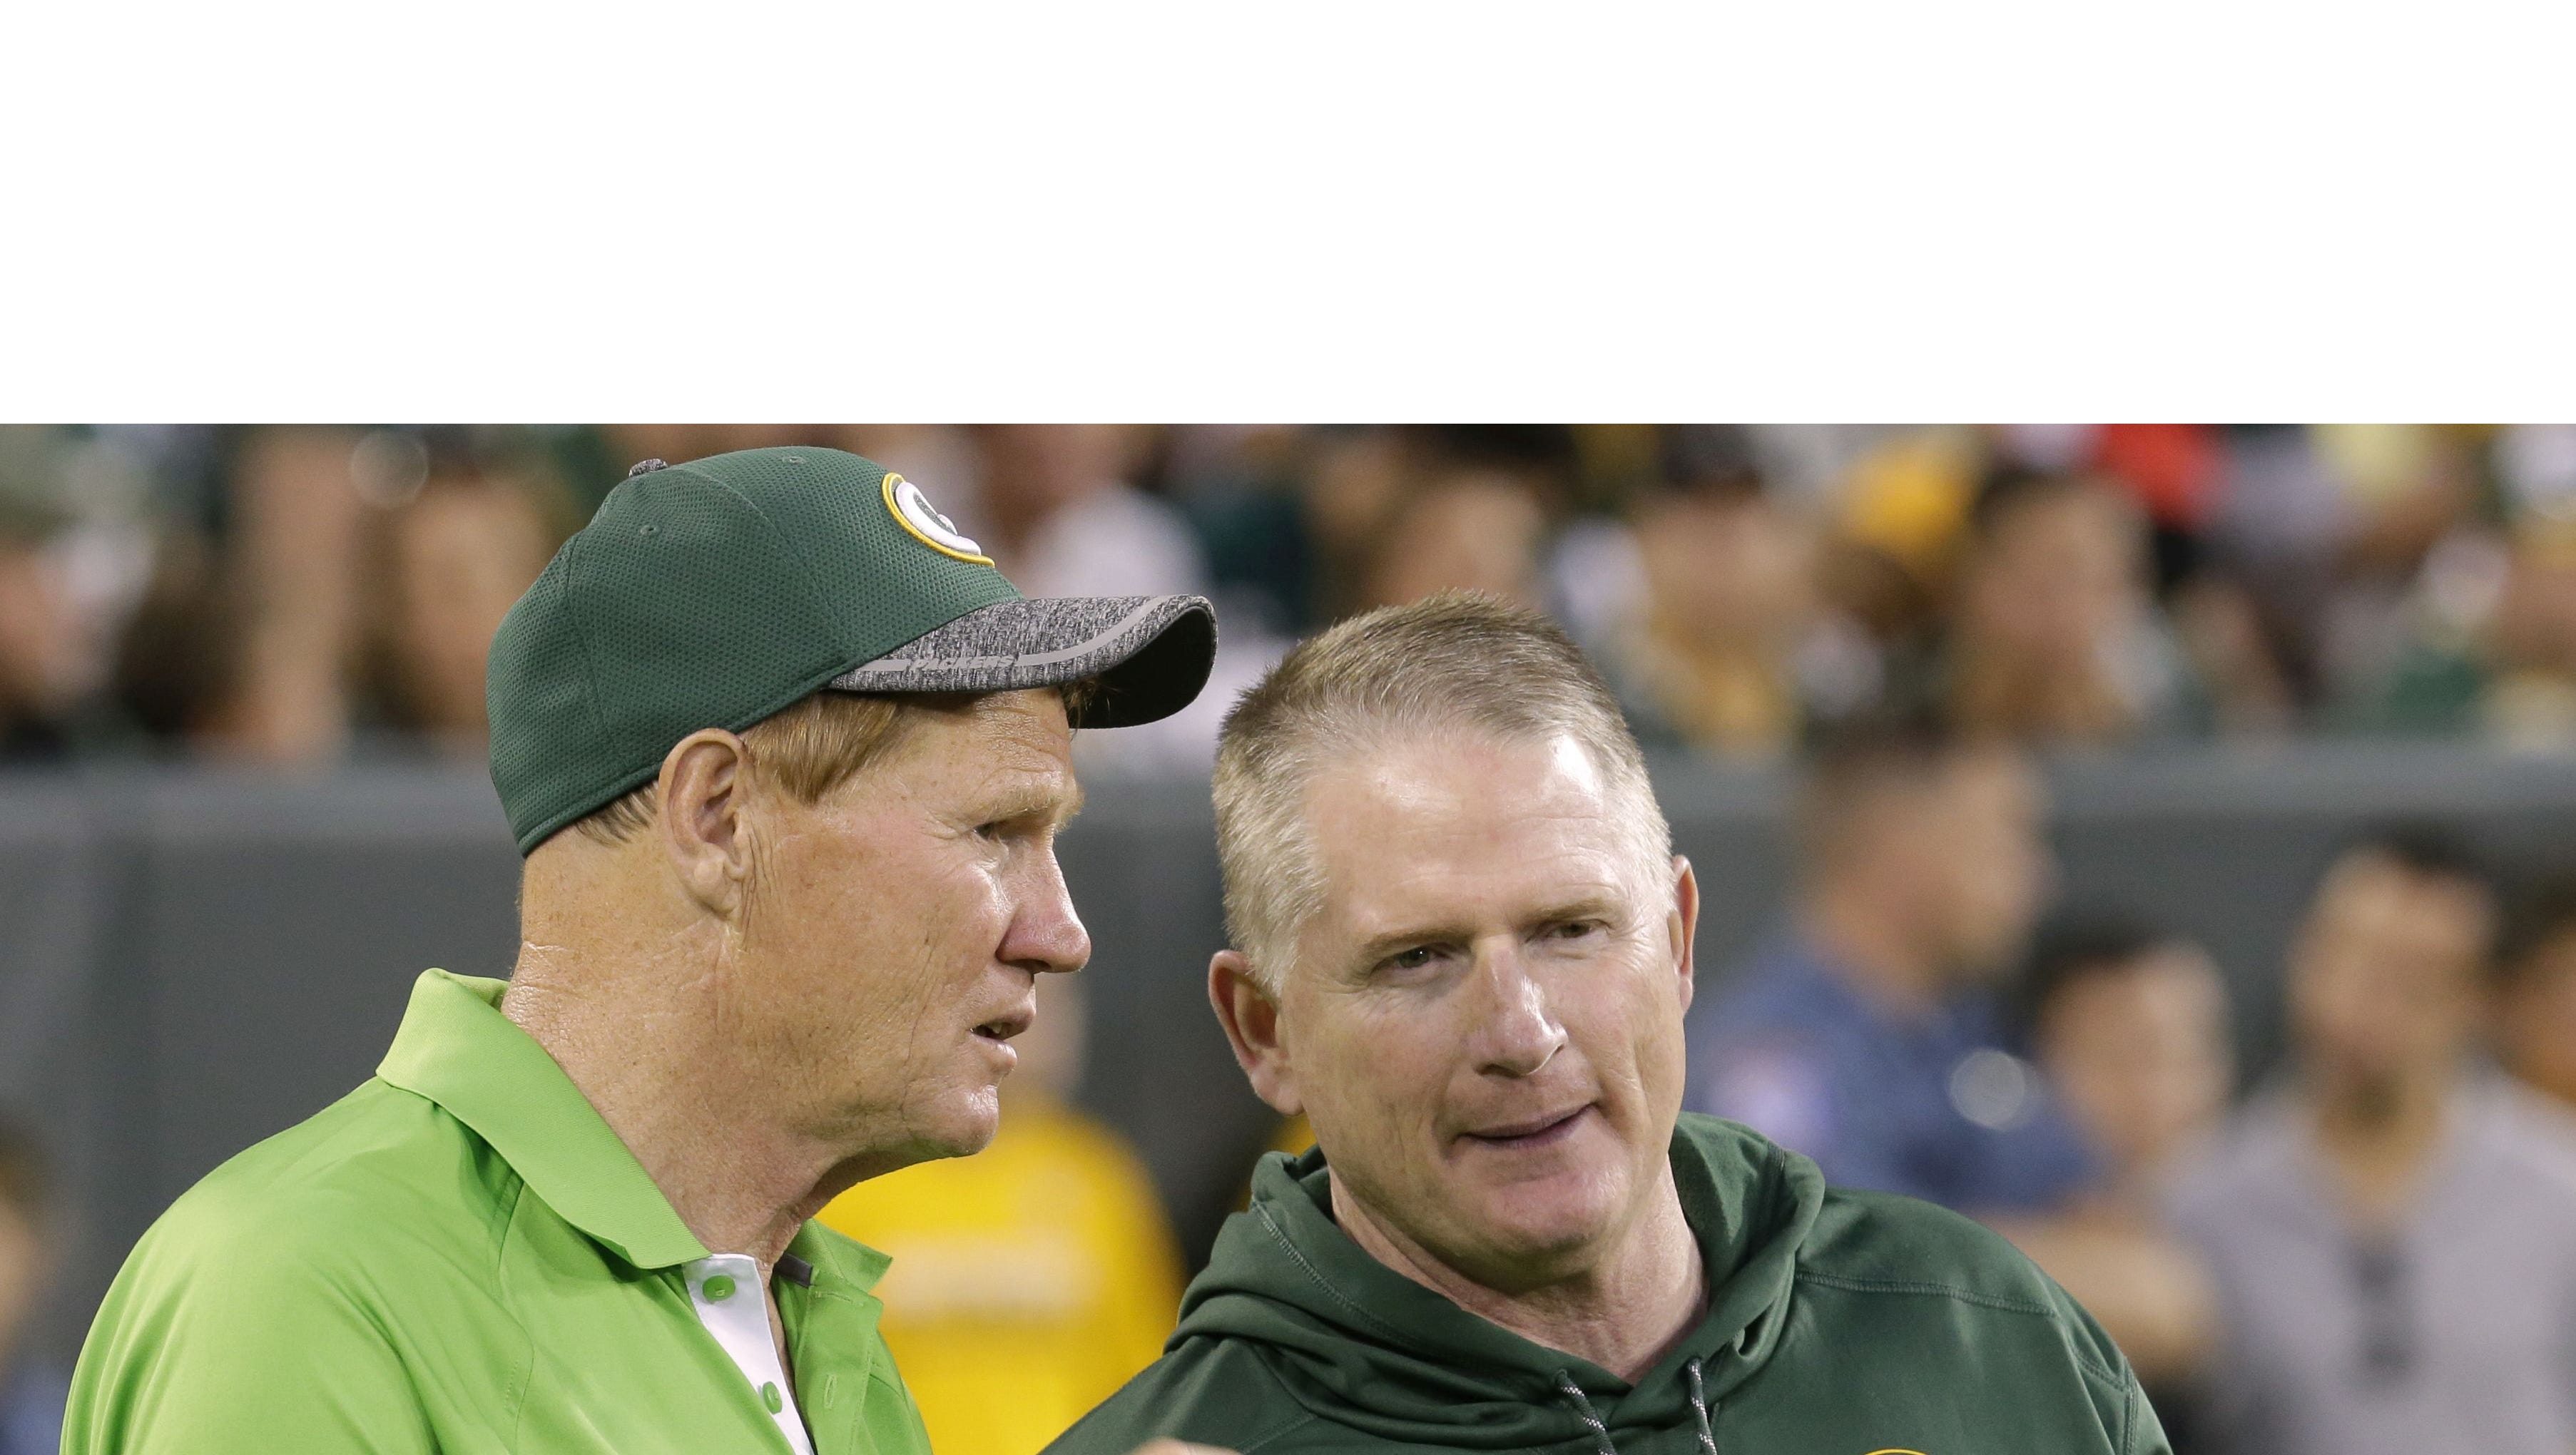 Green Bay Packers president Mark Murphy (left) talks with vice president of football administration/player finance Russ Ball during the team's 16th annual Family Night practice Sunday, July 31, 2016 at Lambeau Field in Green Bay.